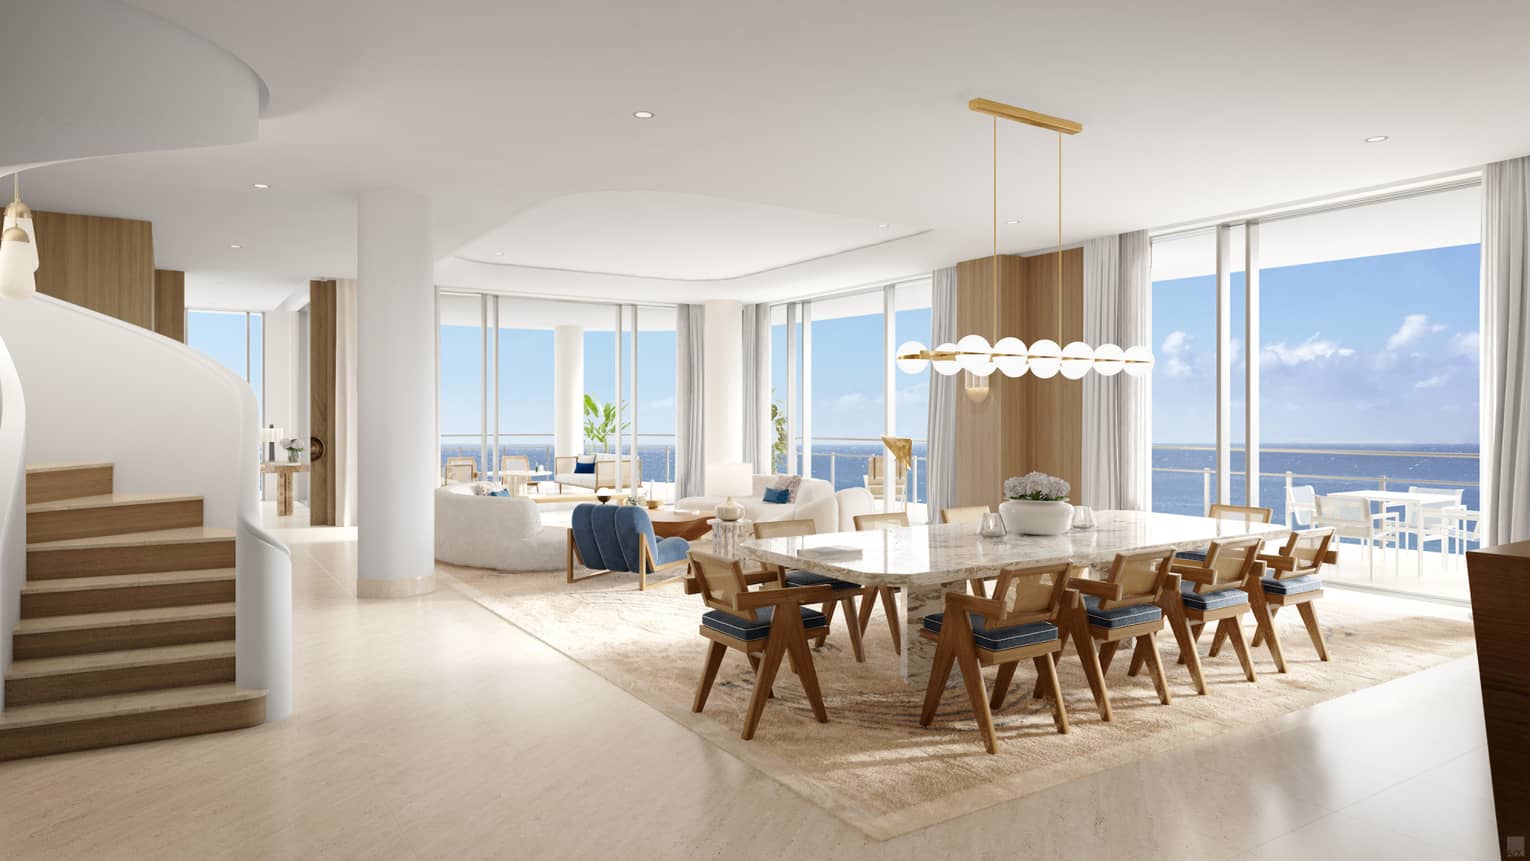 Rendering of penthouse showing dining area, lounge area and floor-to-ceiling windows with ocean view